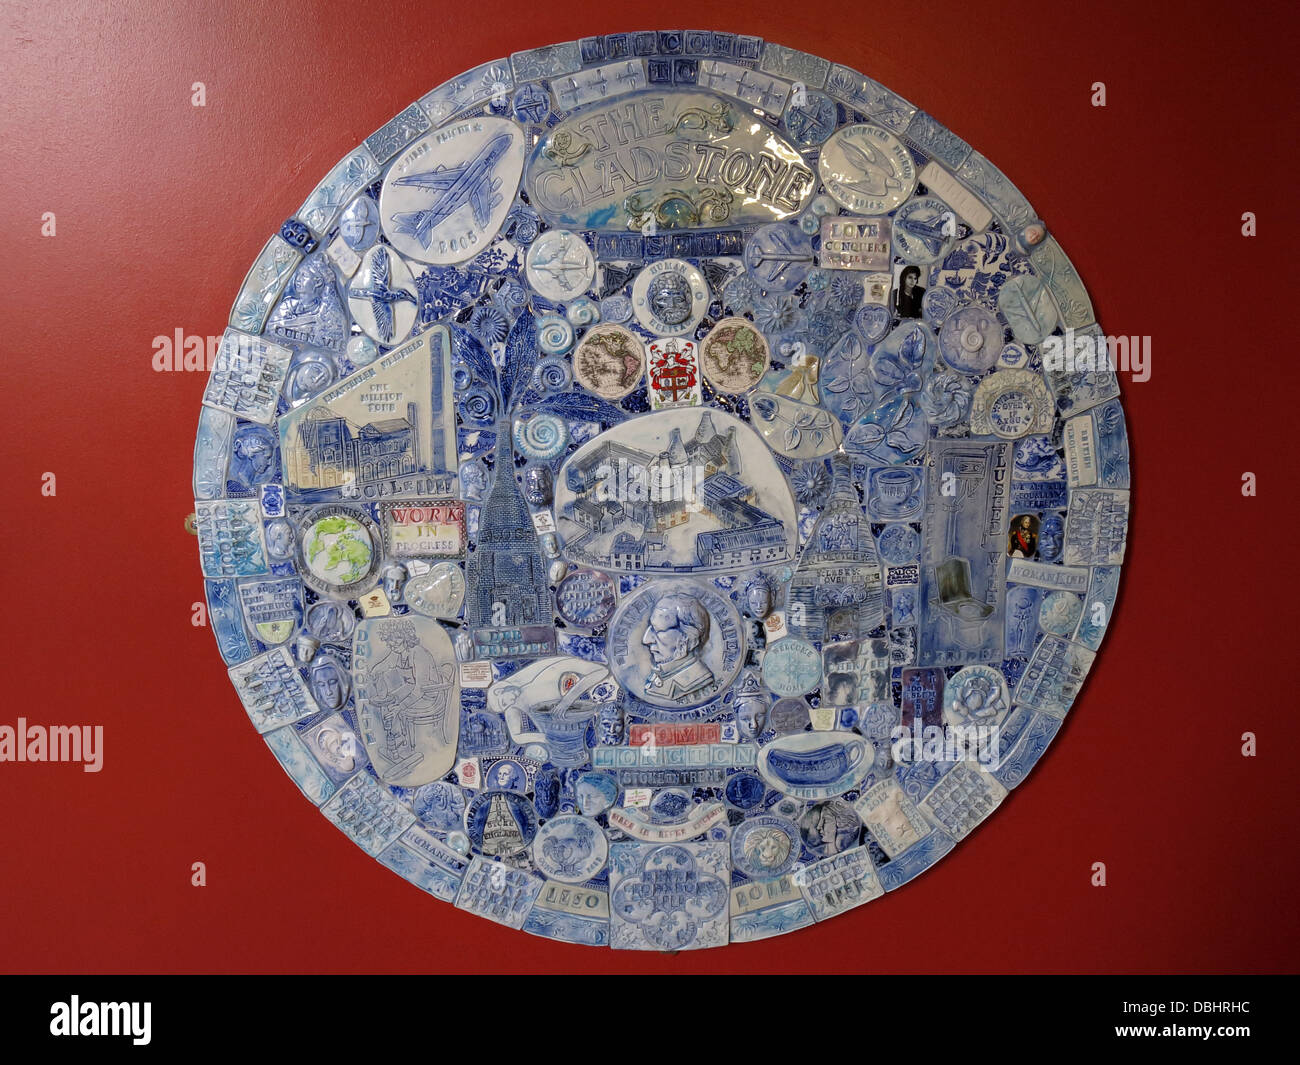 Circular ceramic pottery mosaic from Longton Stoke-On-Trent Great Britain showing potteries heritage at the Gladstone Pottery Museum Stock Photo